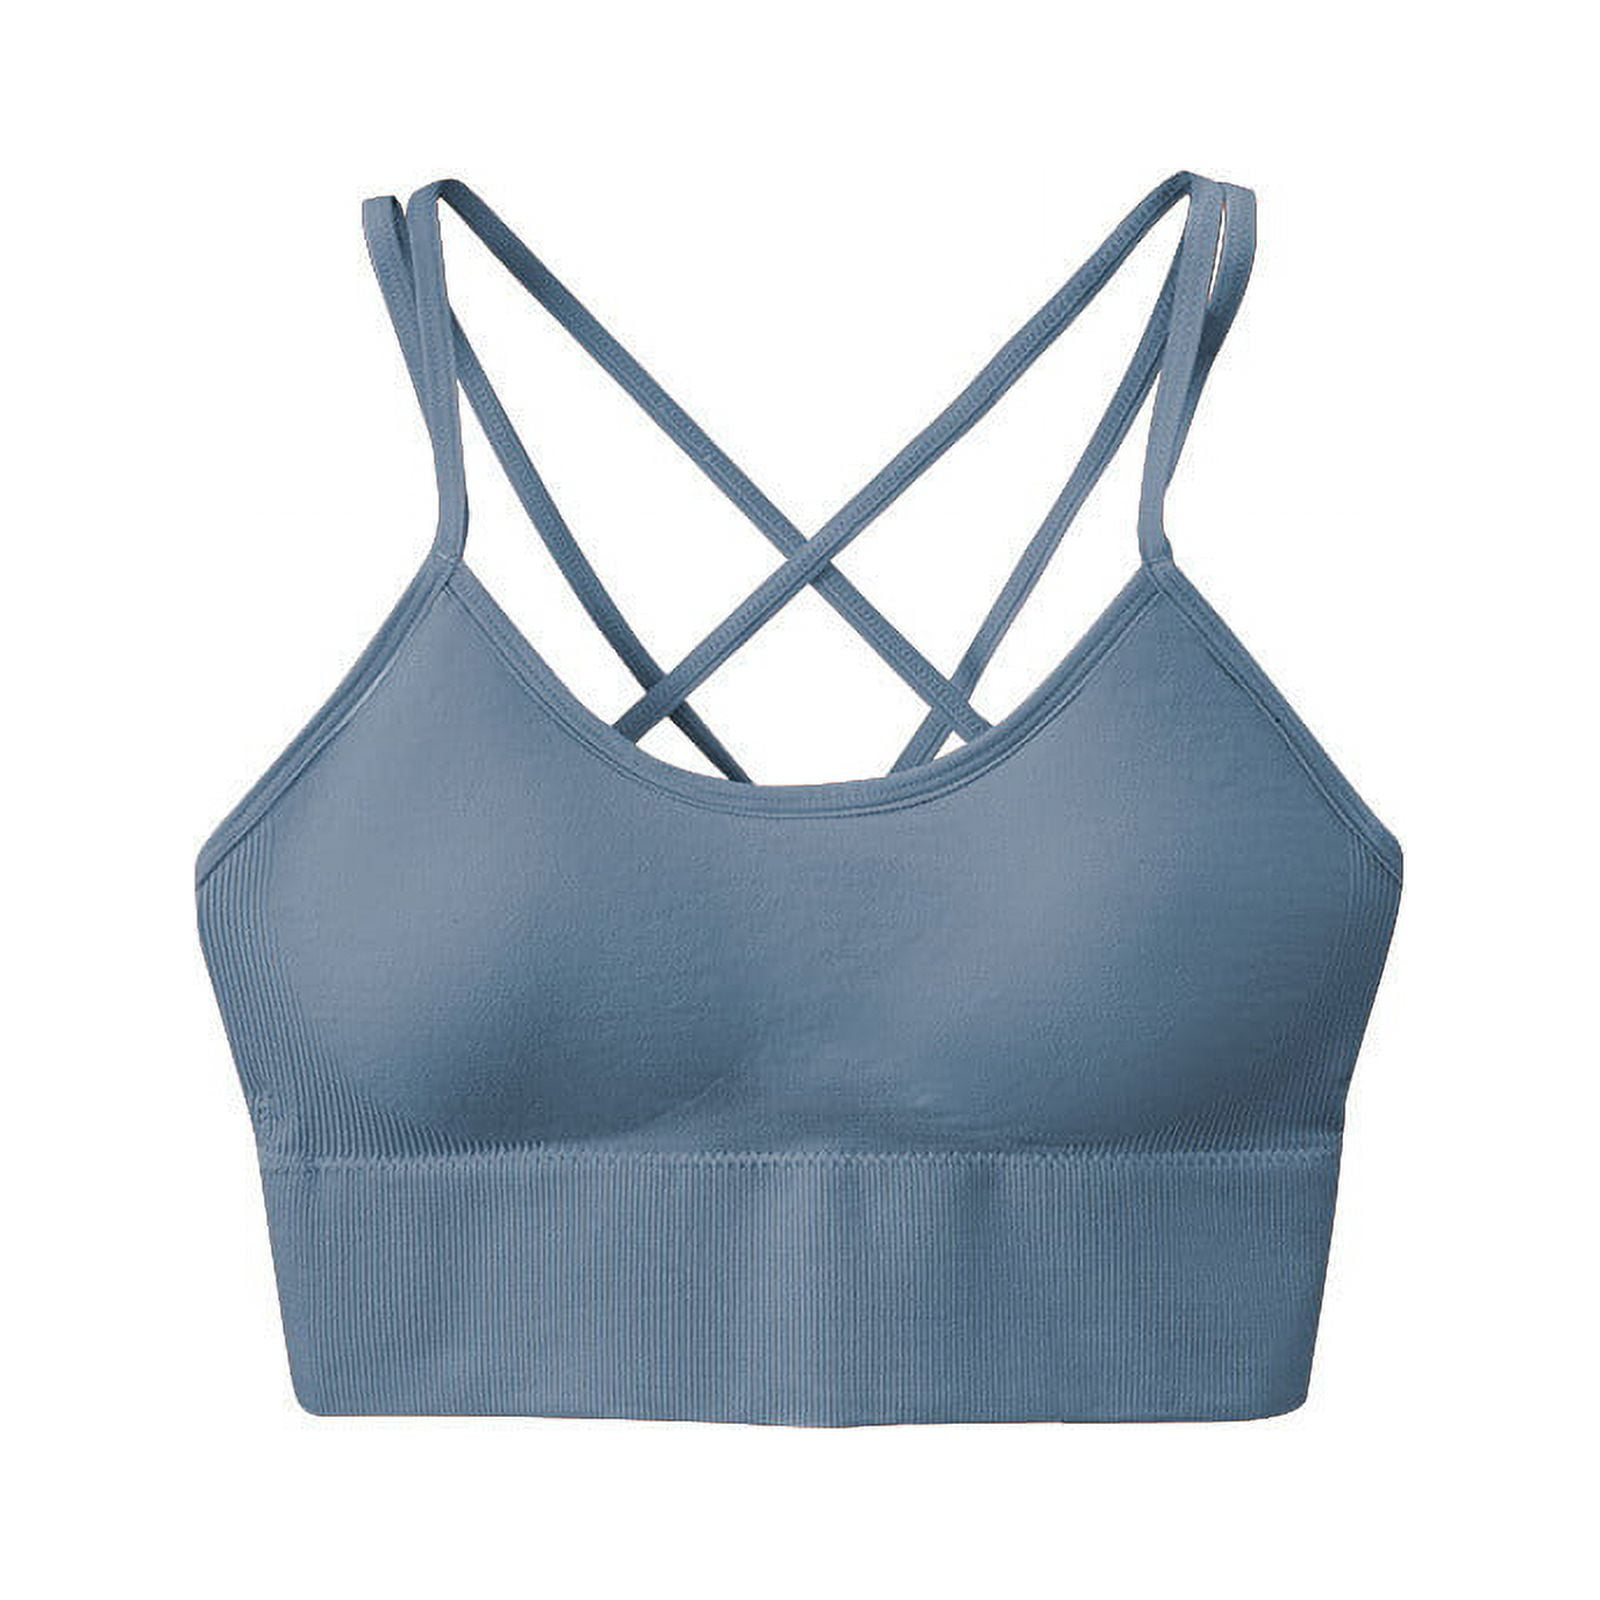 XMXM Women Cotton Polyester Padded Wireless Sports Bra with Removable Pads  for Daily Use Gym Yoga Dancing Sky Blue